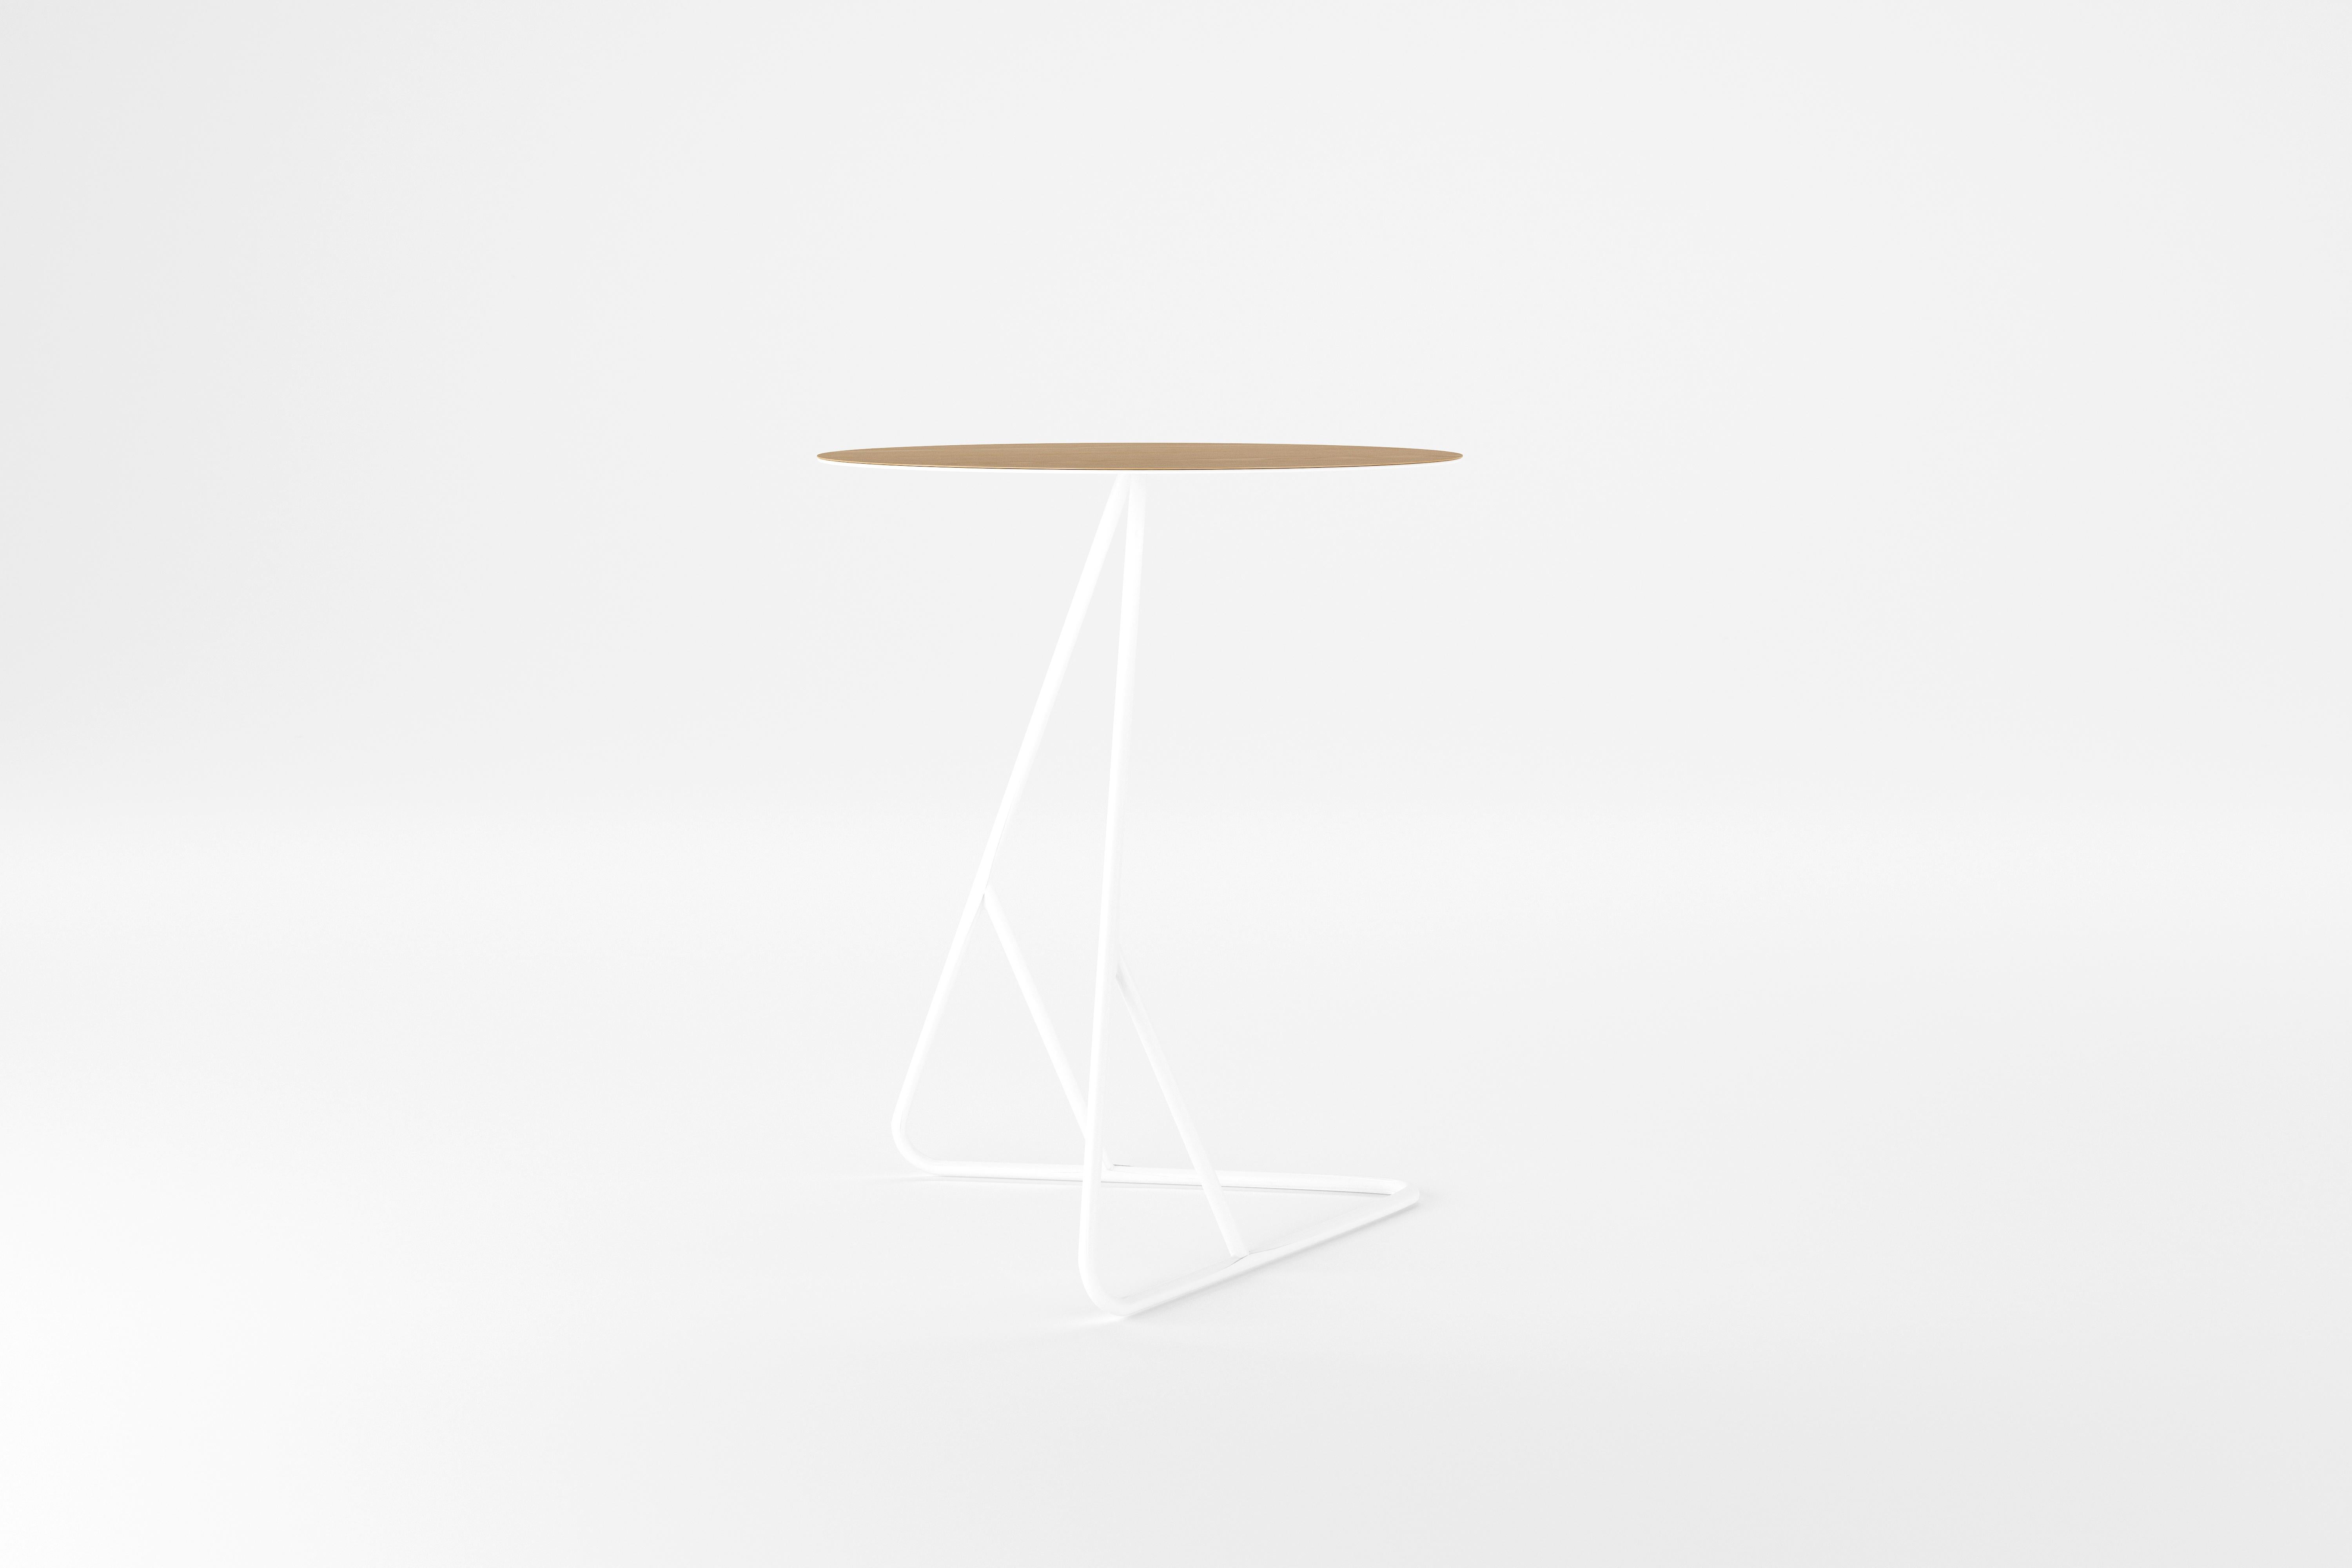 Seemingly defying the laws of nature, this Danish-inspired design is composed of a razor thin metal top covered with oak veneer, atop an elegant wire base. The warmth of the wood grain adds a level of complexity balancing the minimalist base for a